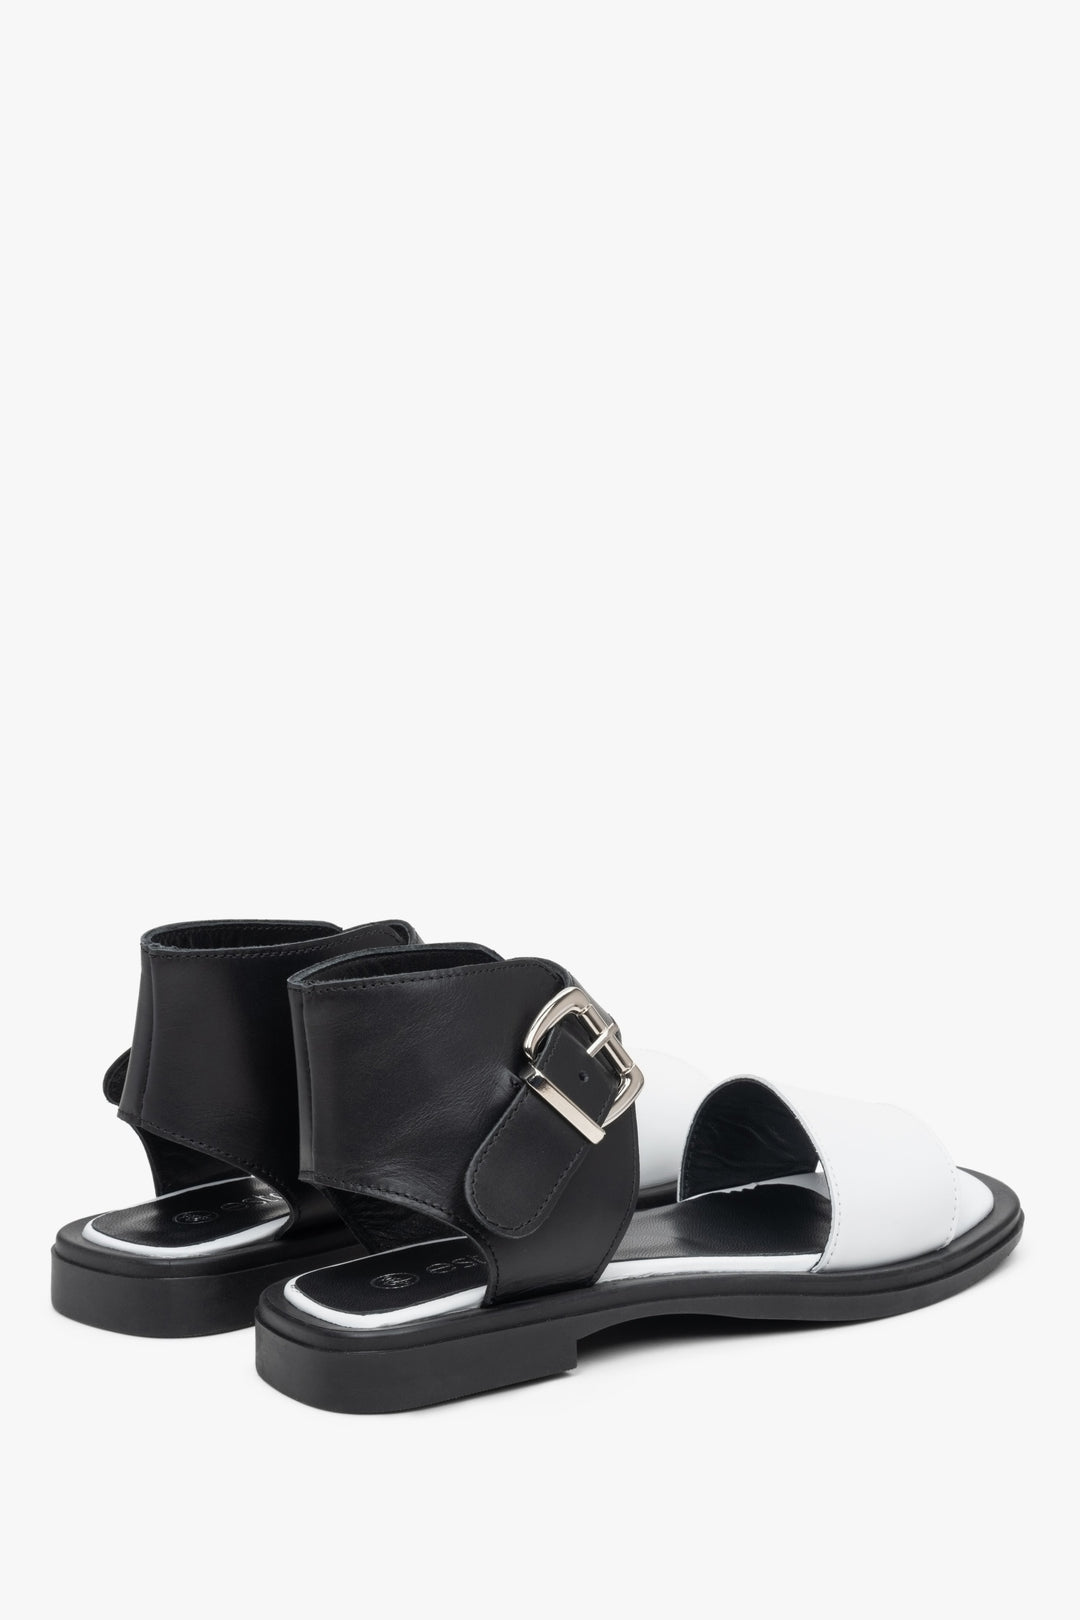 Women's leather sandals in white and black Estro: presentation of the heel line and the side of the shoe.